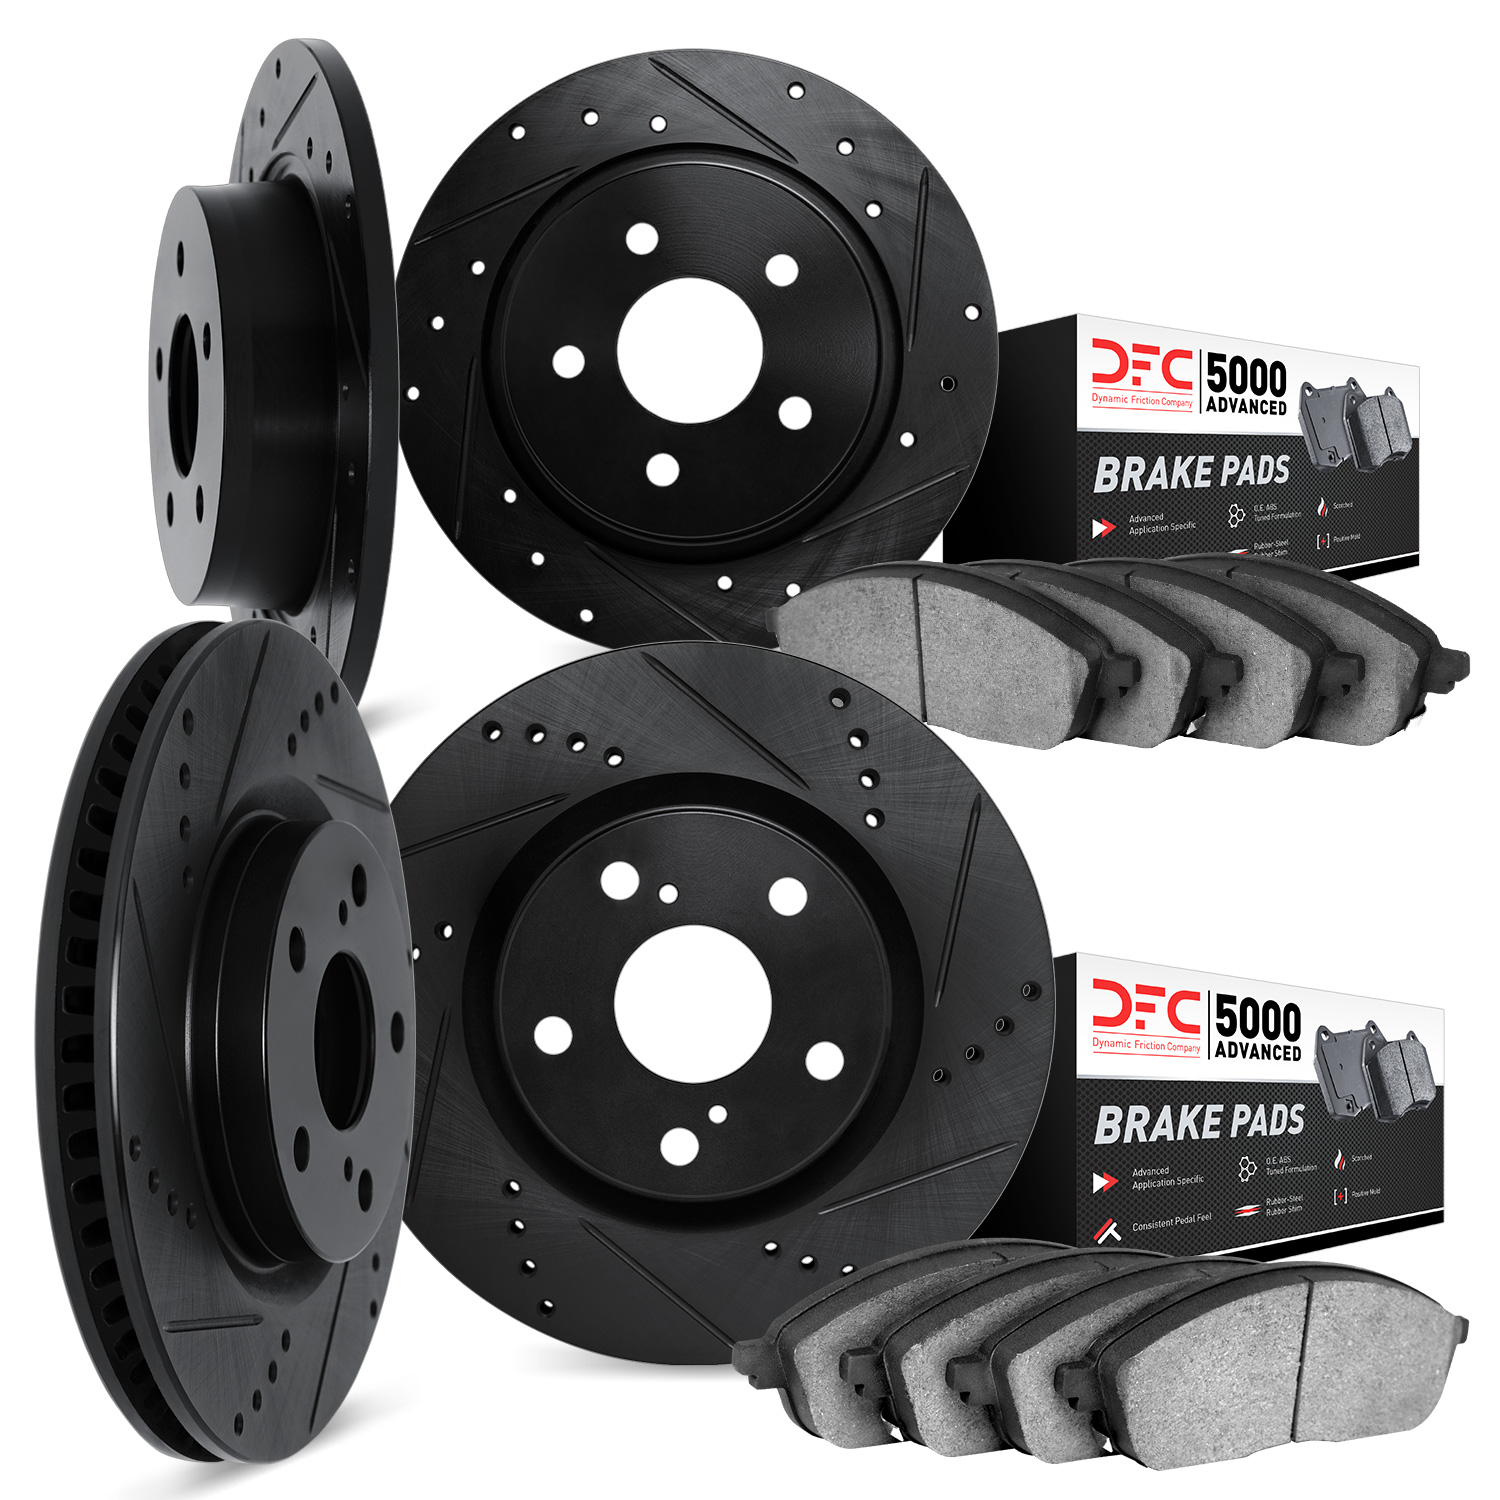 8504-13045 Drilled/Slotted Brake Rotors w/5000 Advanced Brake Pads Kit [Black], 2010-2014 Subaru, Position: Front and Rear